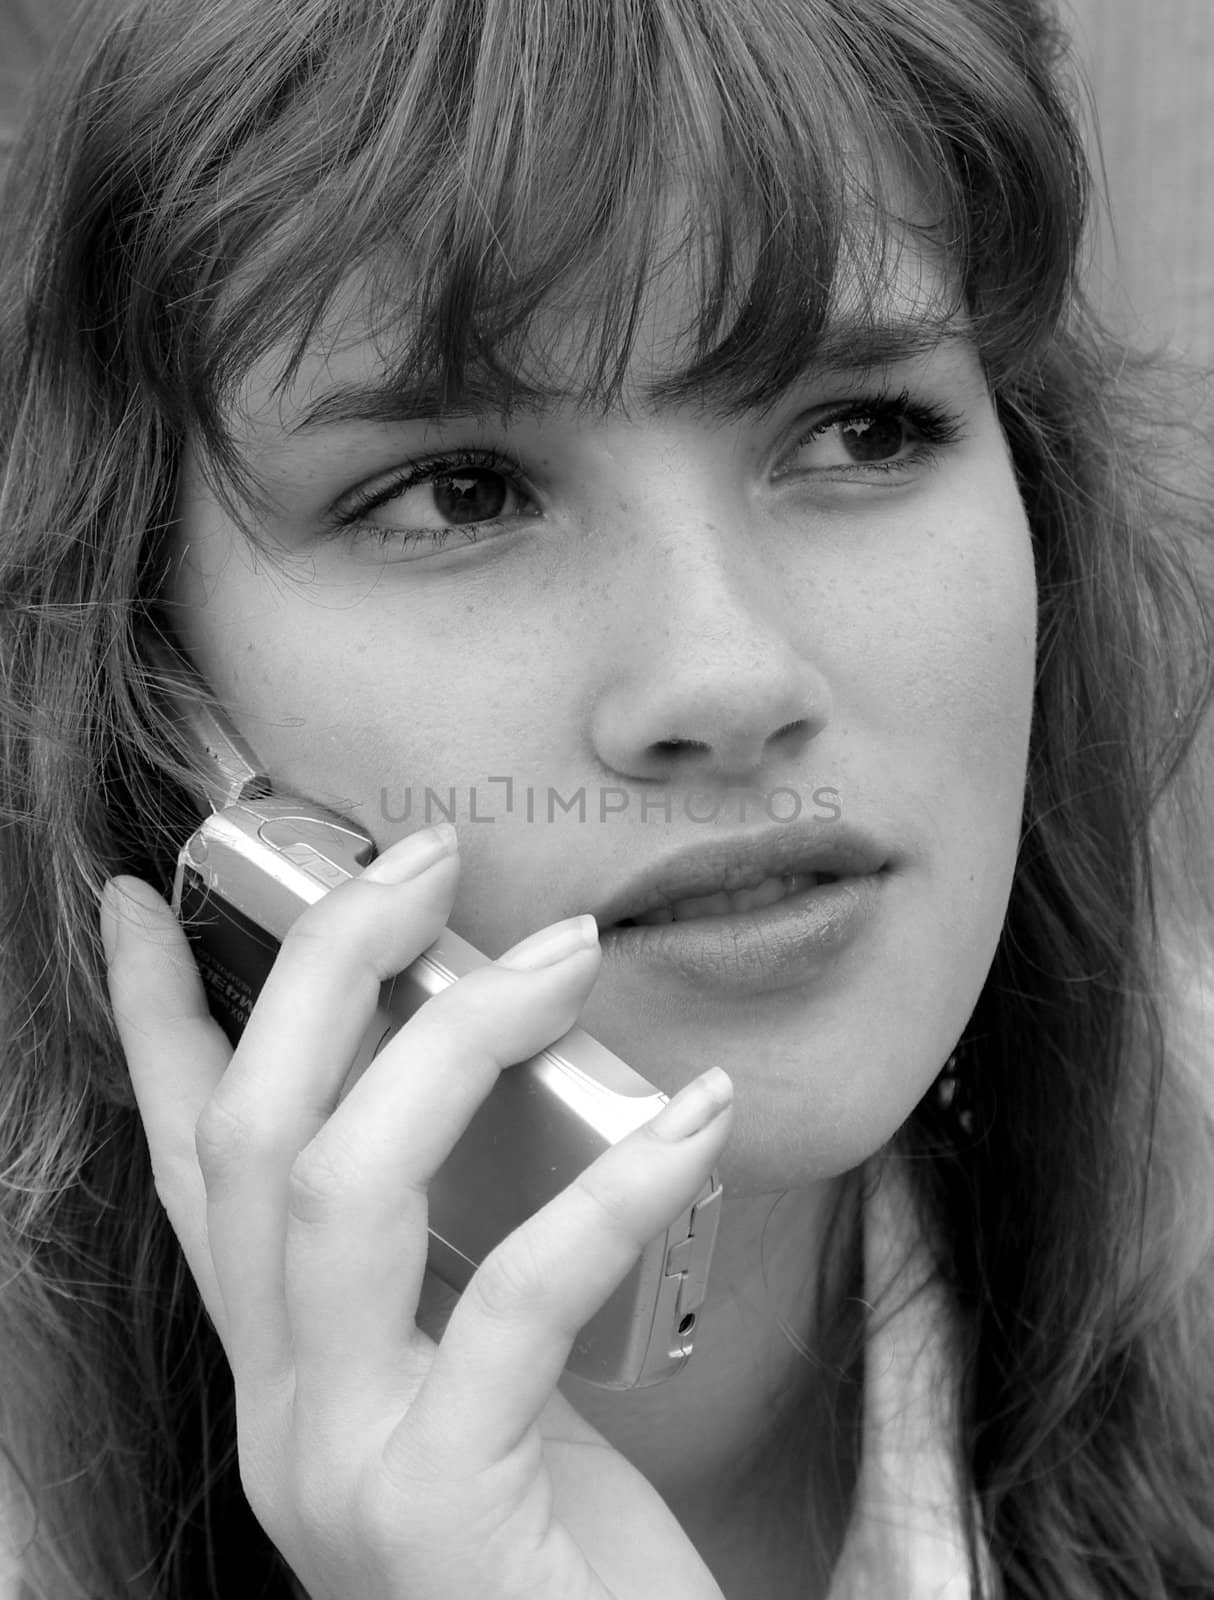 Portrait of a girl on the phone in black and white.